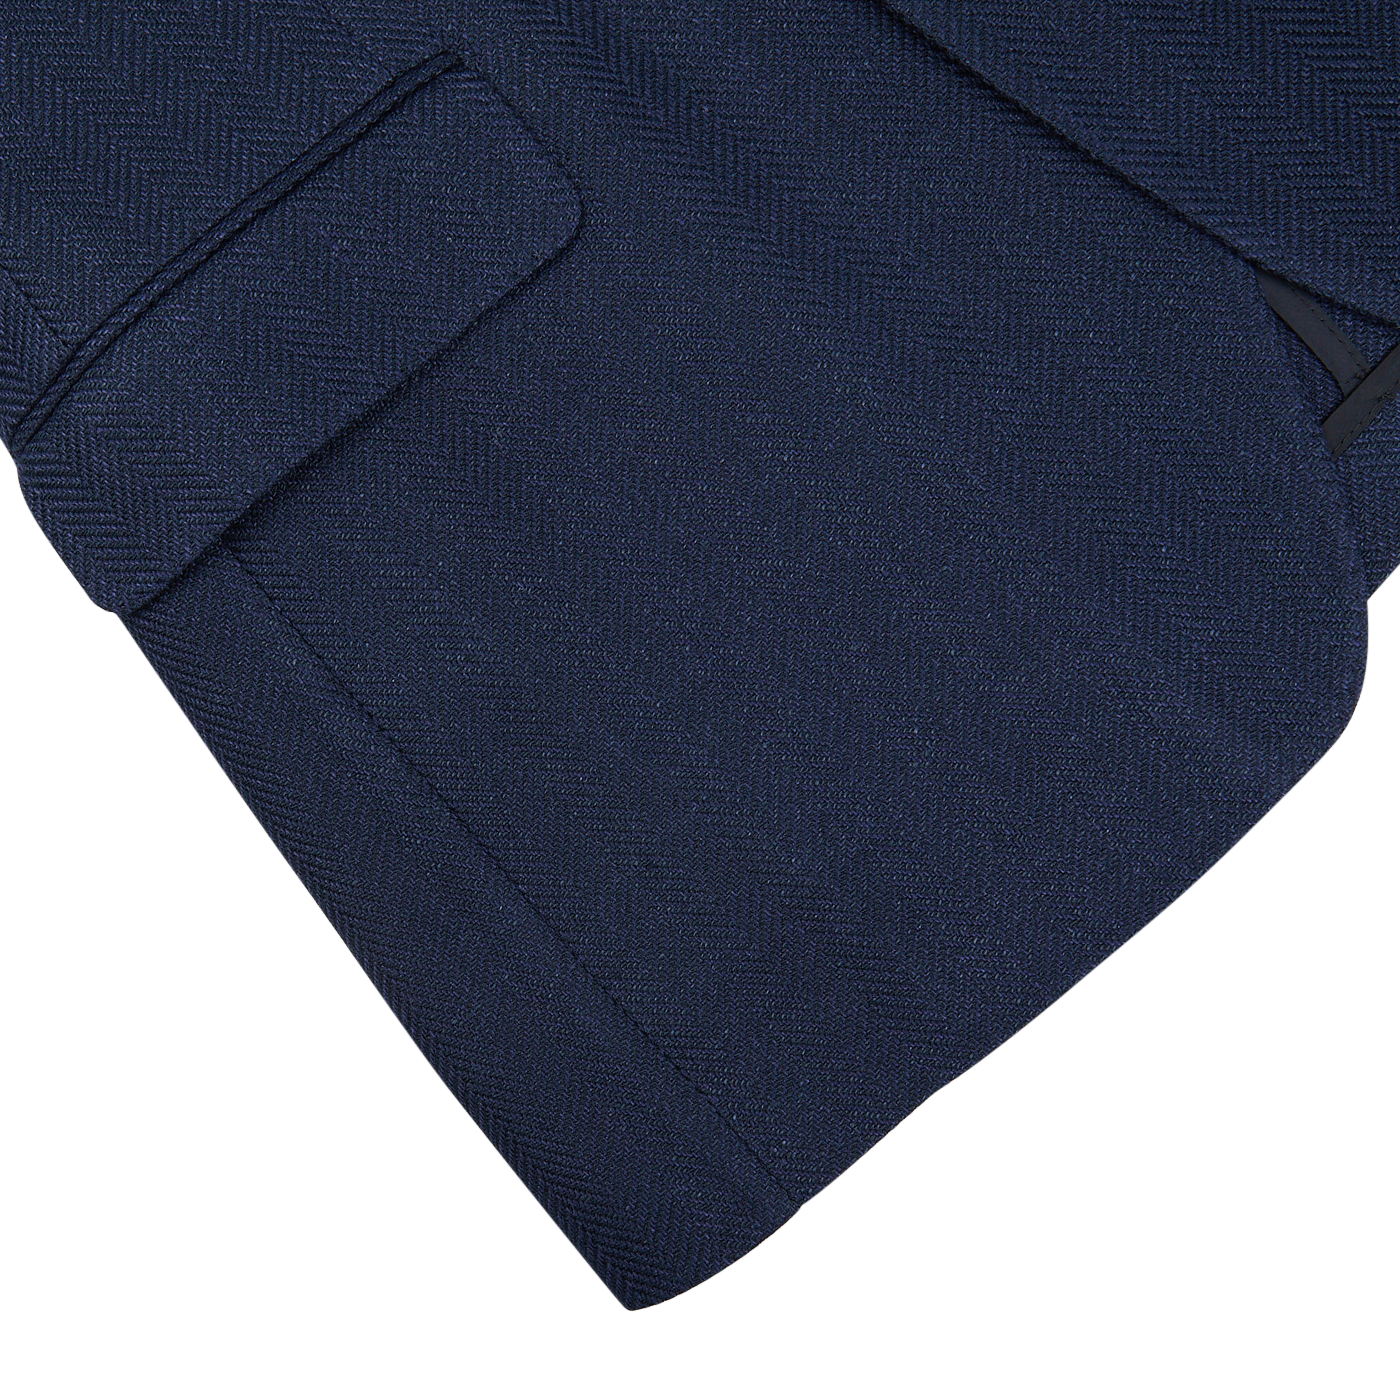 Close-up of navy blue herringbone cotton-linen blend fabric with pocket detail, possibly from a garment such as a Tagliatore Vesuvio blazer.